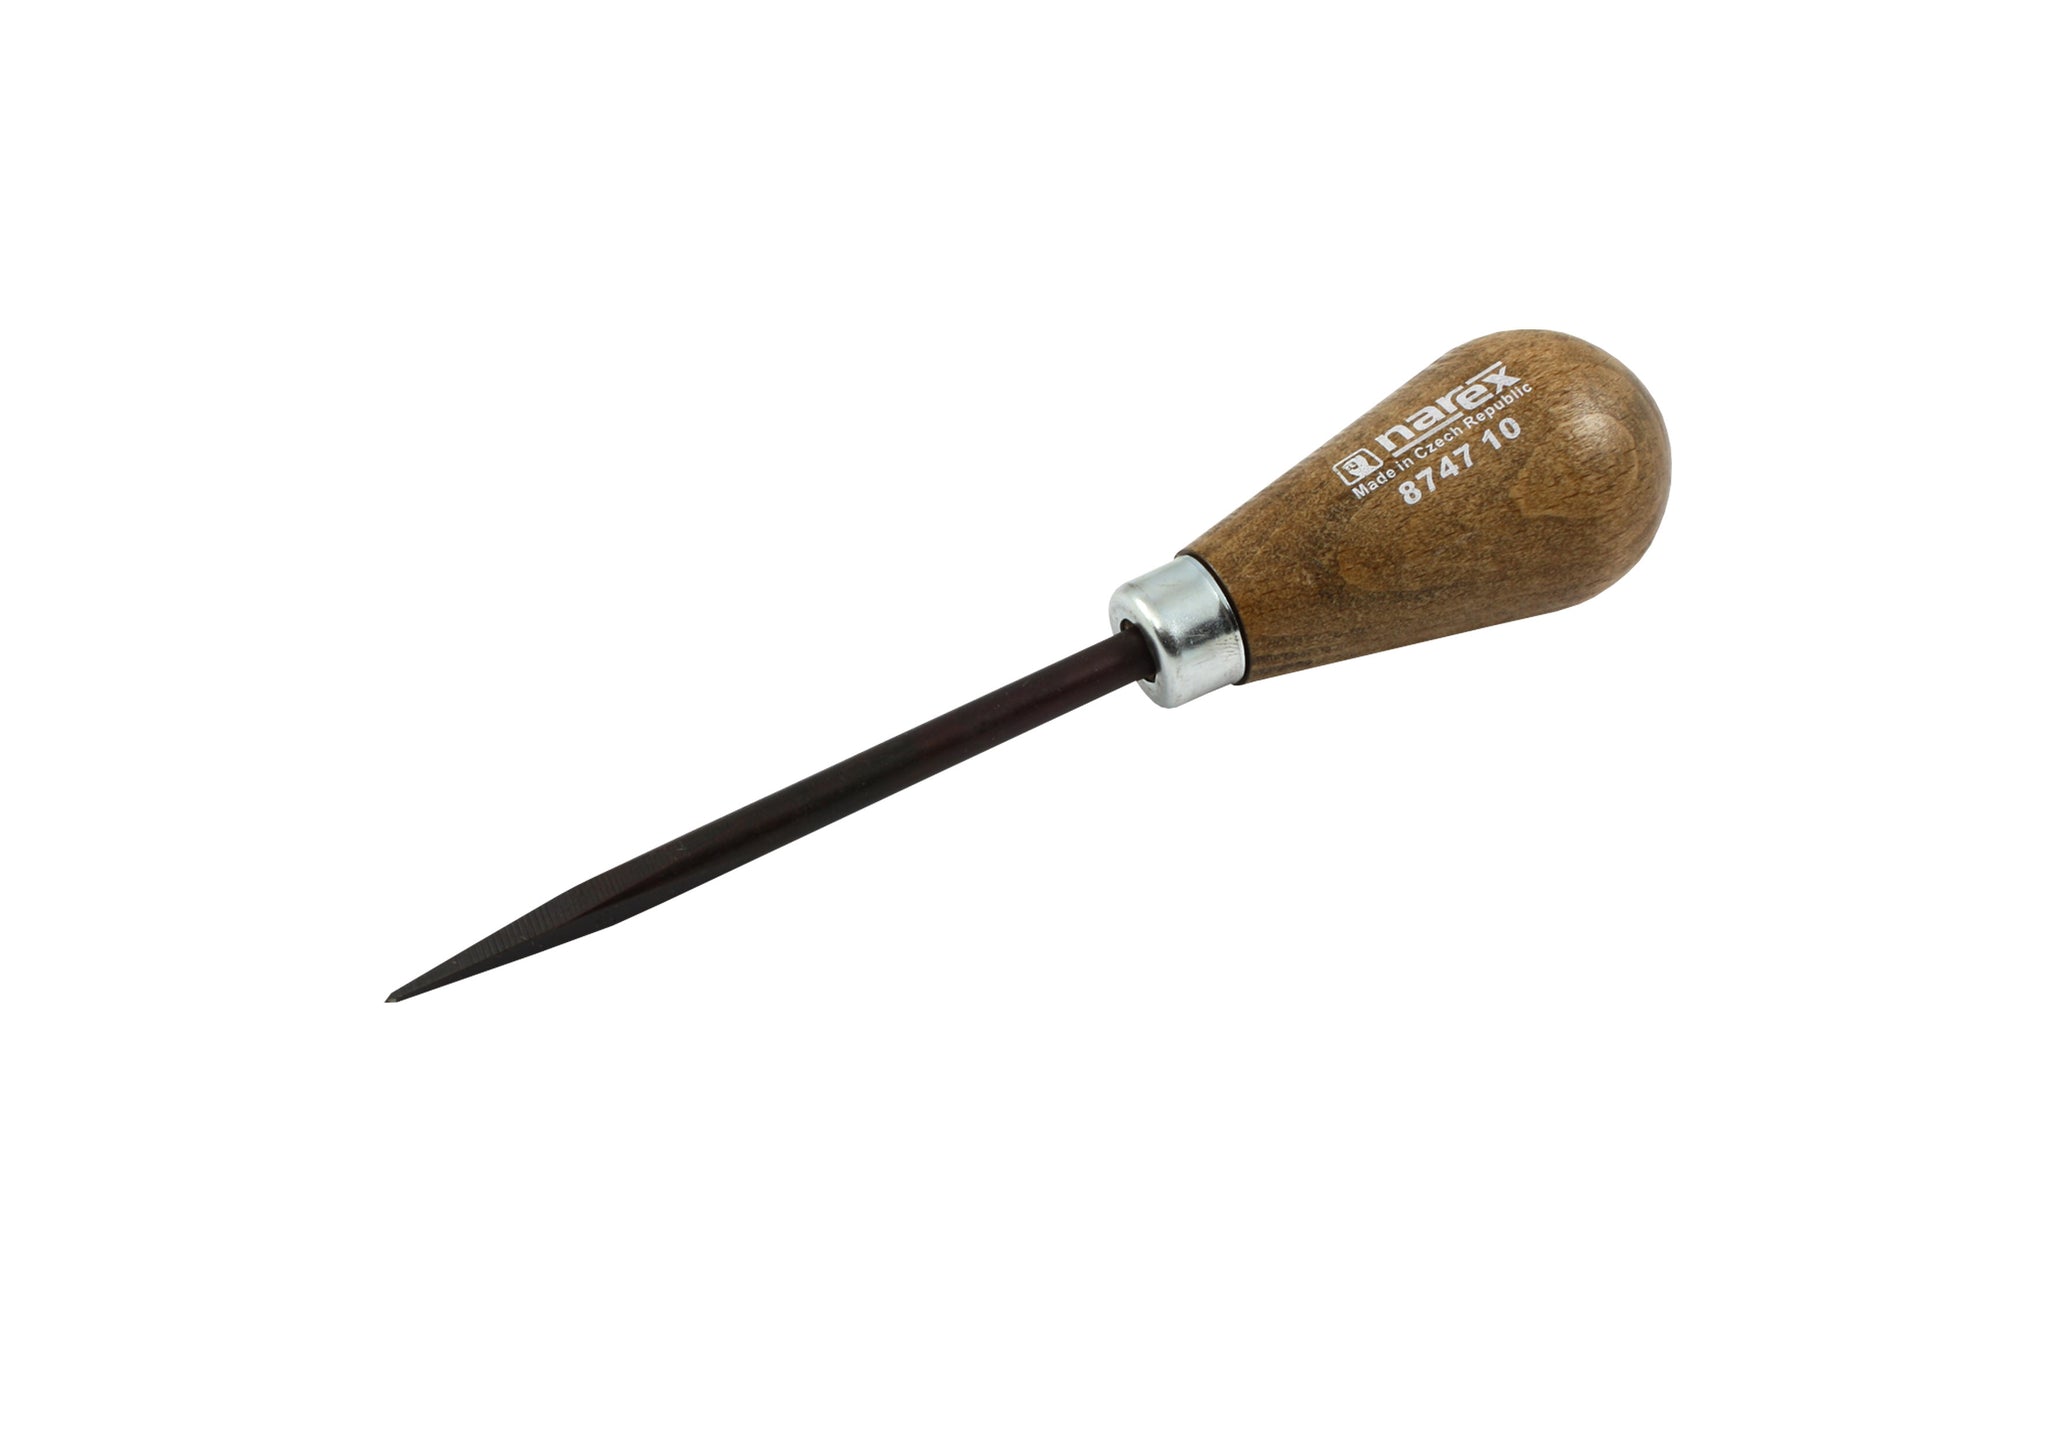 Awl/ Reamer, Leather craft tool Narex – Wood carving tools STRYI